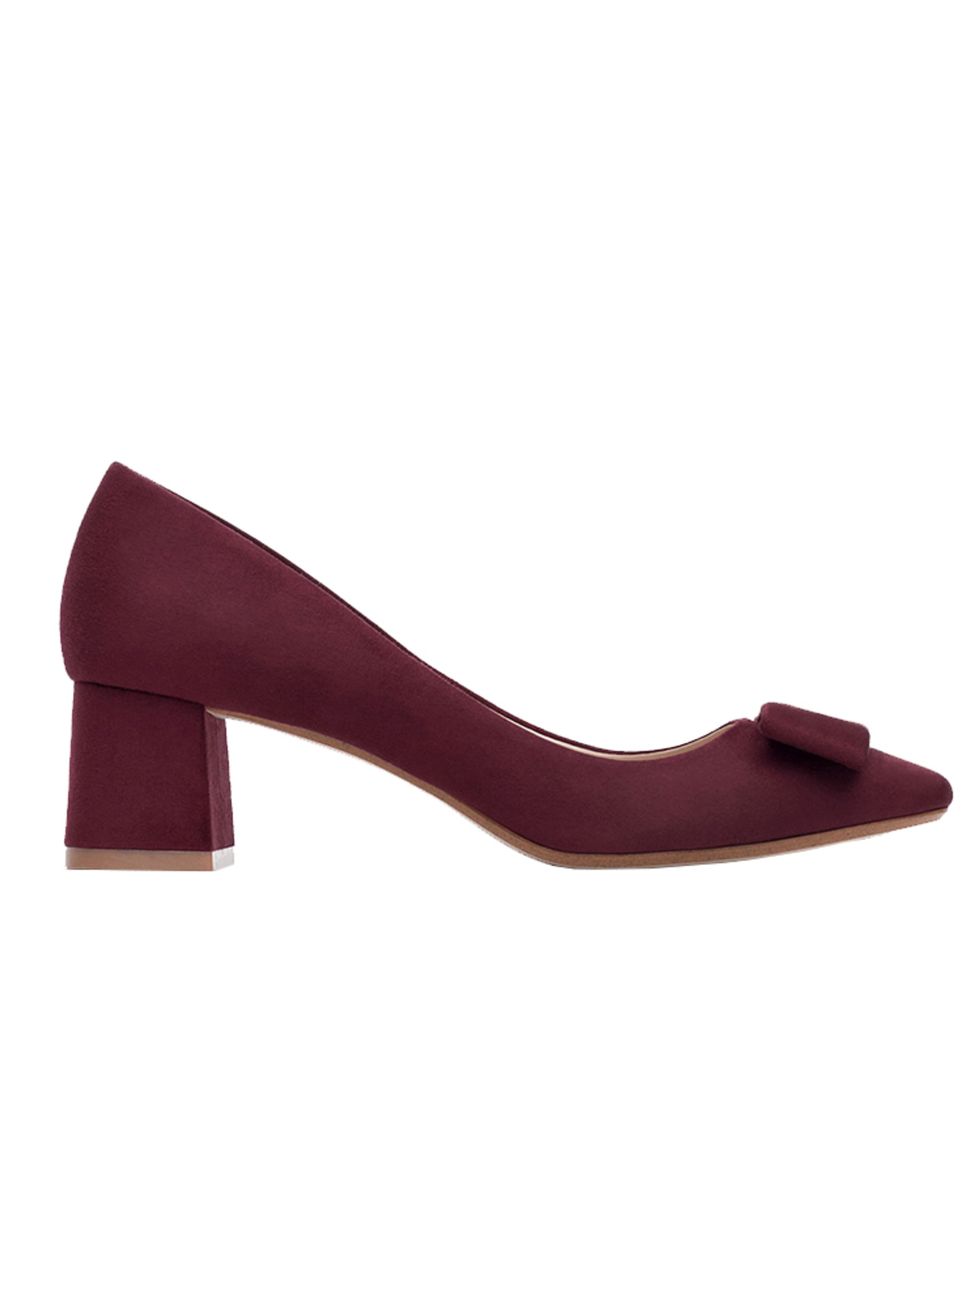 <p><a href="http://www.zara.com/uk/en/woman/shoes/view-all/medium-heel-shoes-with-bow-c734142p2775950.html" target="_blank">Zara </a>mid-heel shoes, £39.99</p>